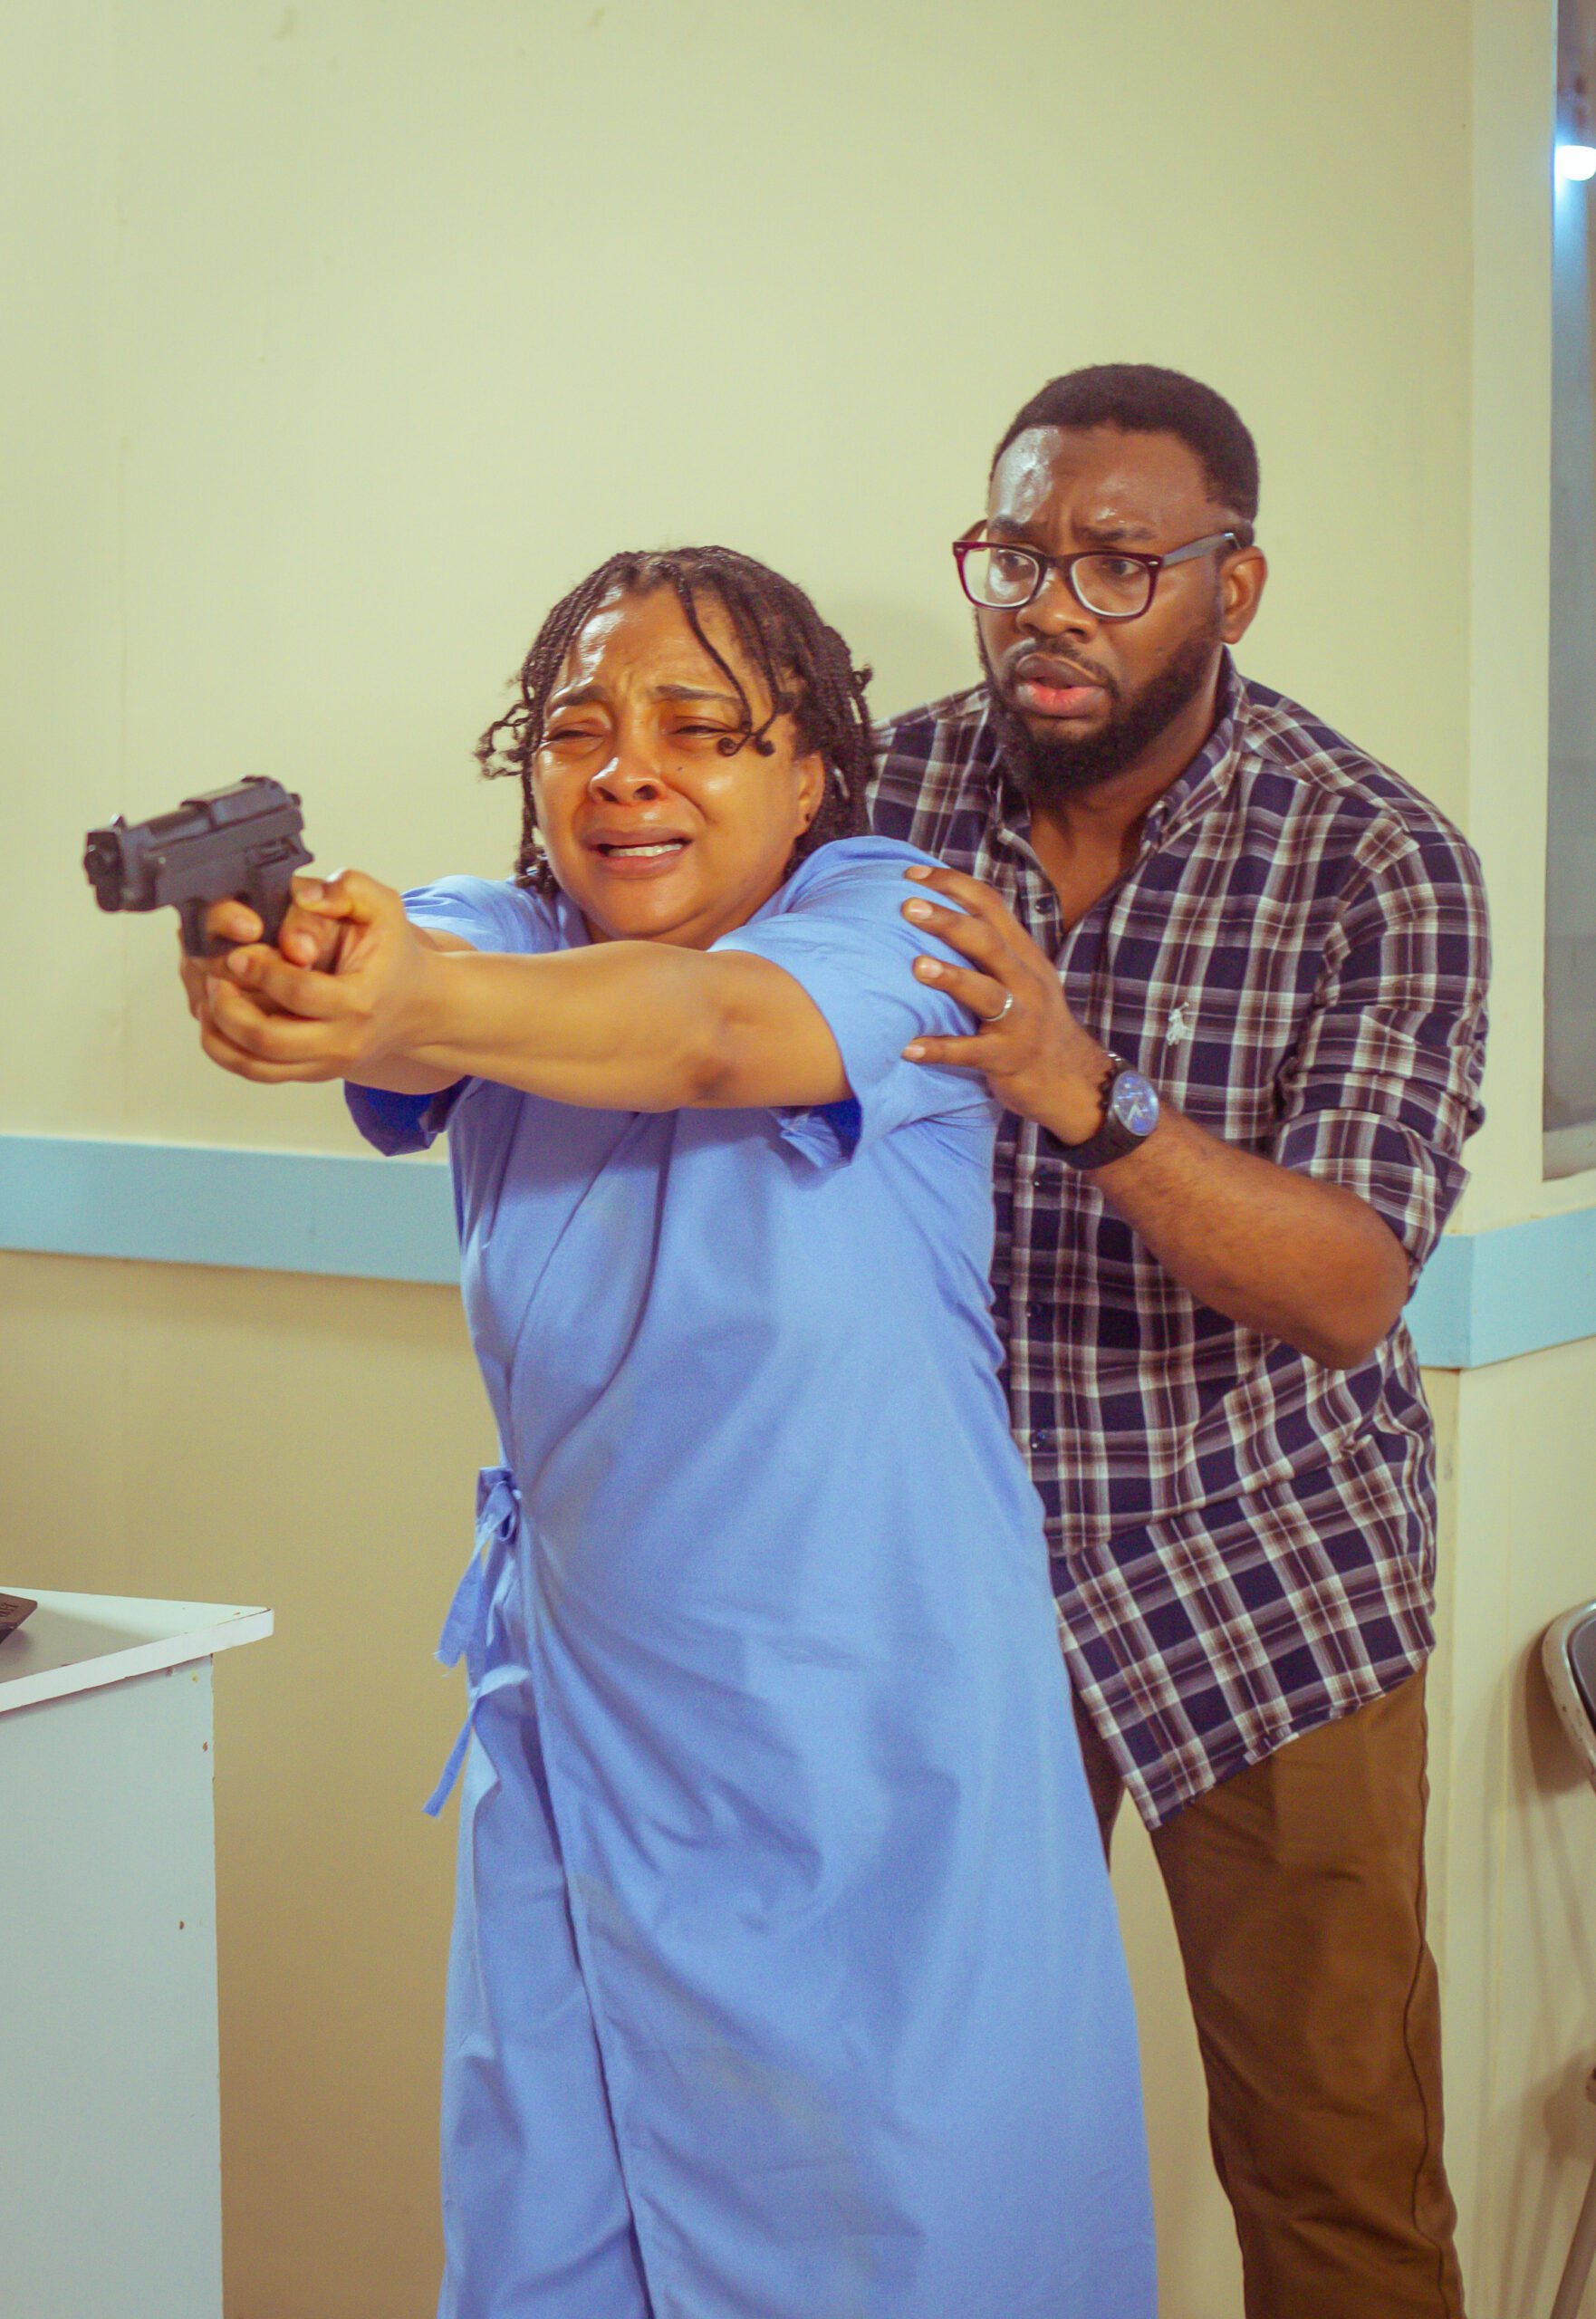 To Love and Protect by Muyiwa Aluko 3 scaled - Muyiwa Aluko’s “To Love and Protect” Unveils Key Cast, Begins Principal Photography (EXCLUSIVE)